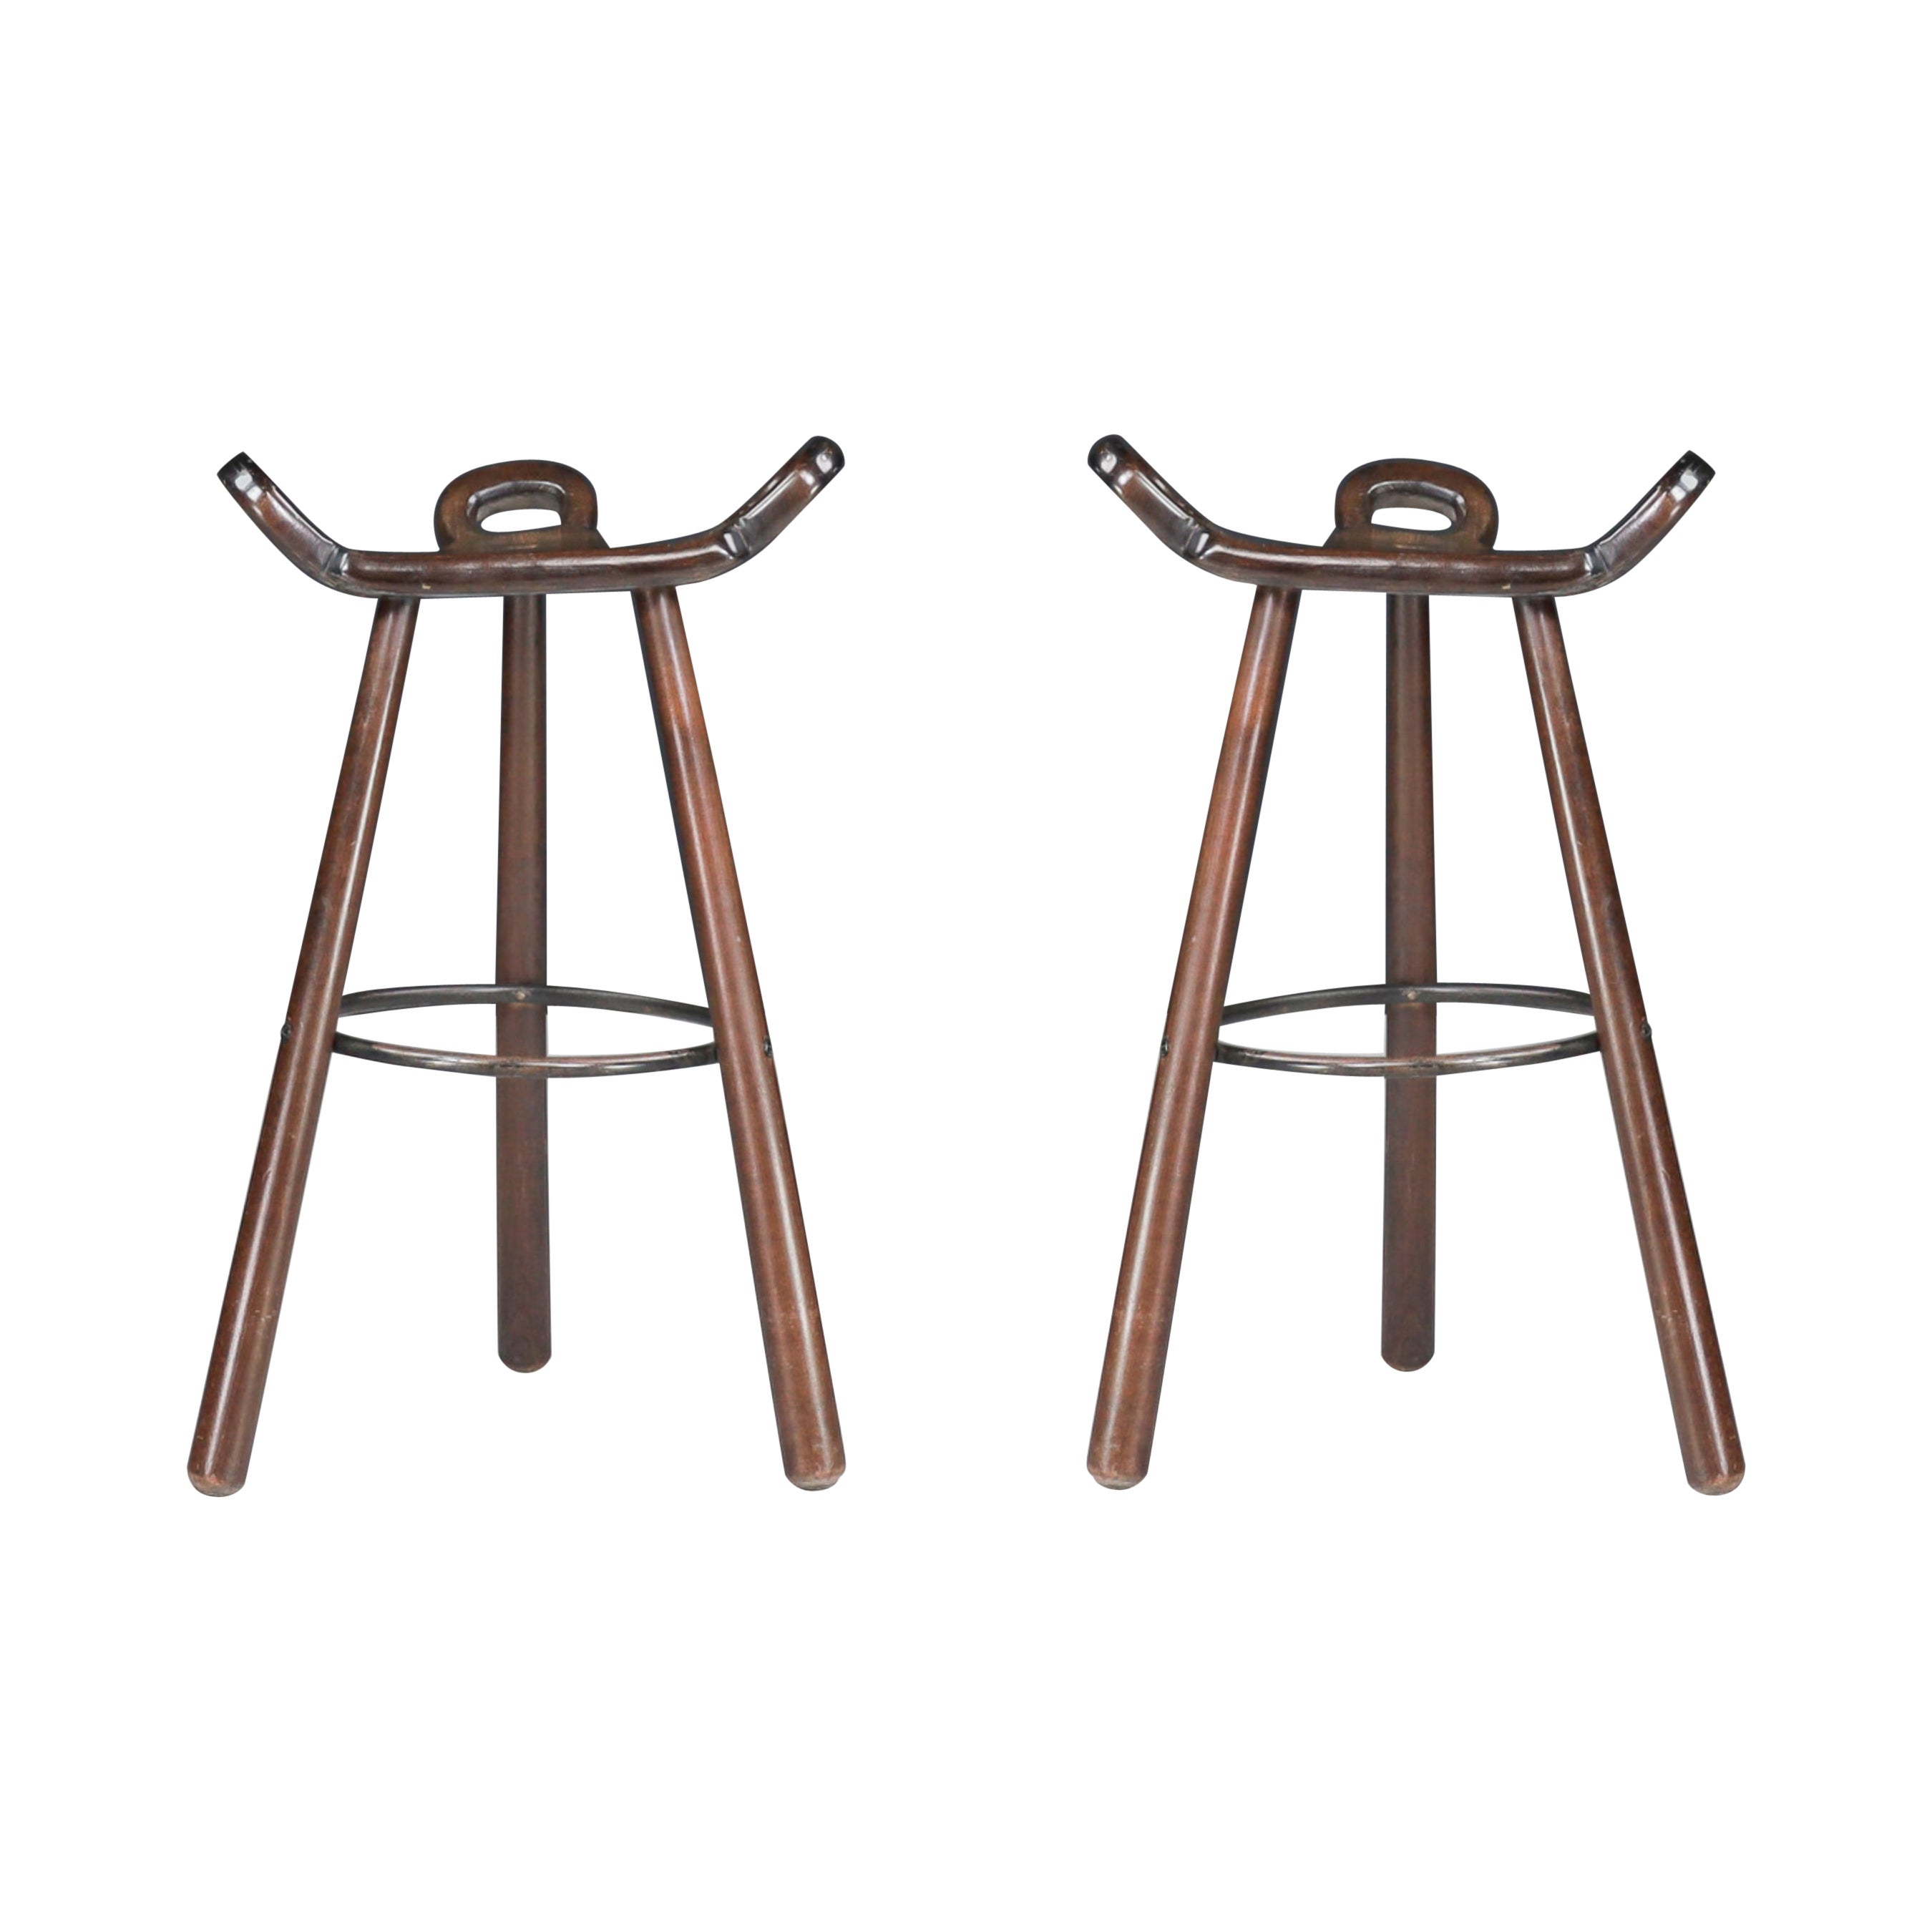 Marbella Sergio Rodrigues Bar Stools Spain 1970s For Sale